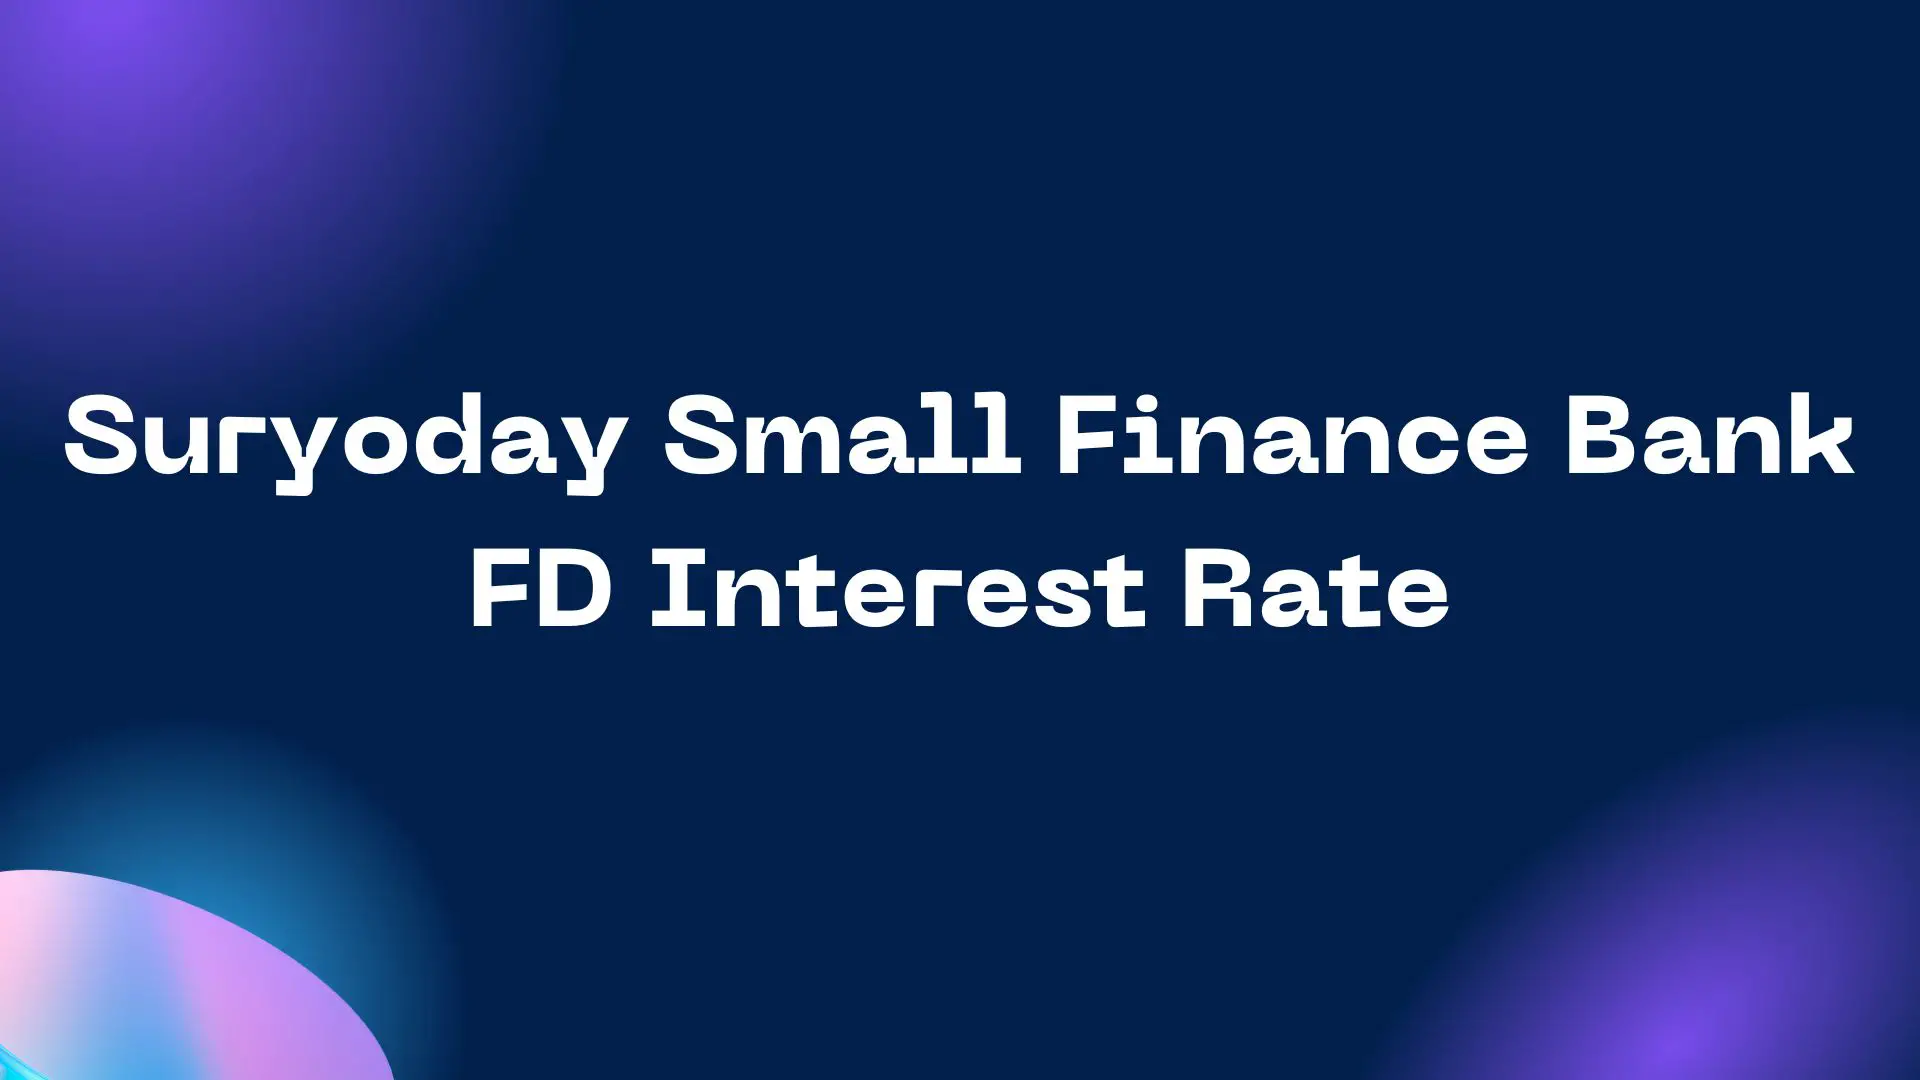 Suryoday Small Finance Bank FD Interest Rate